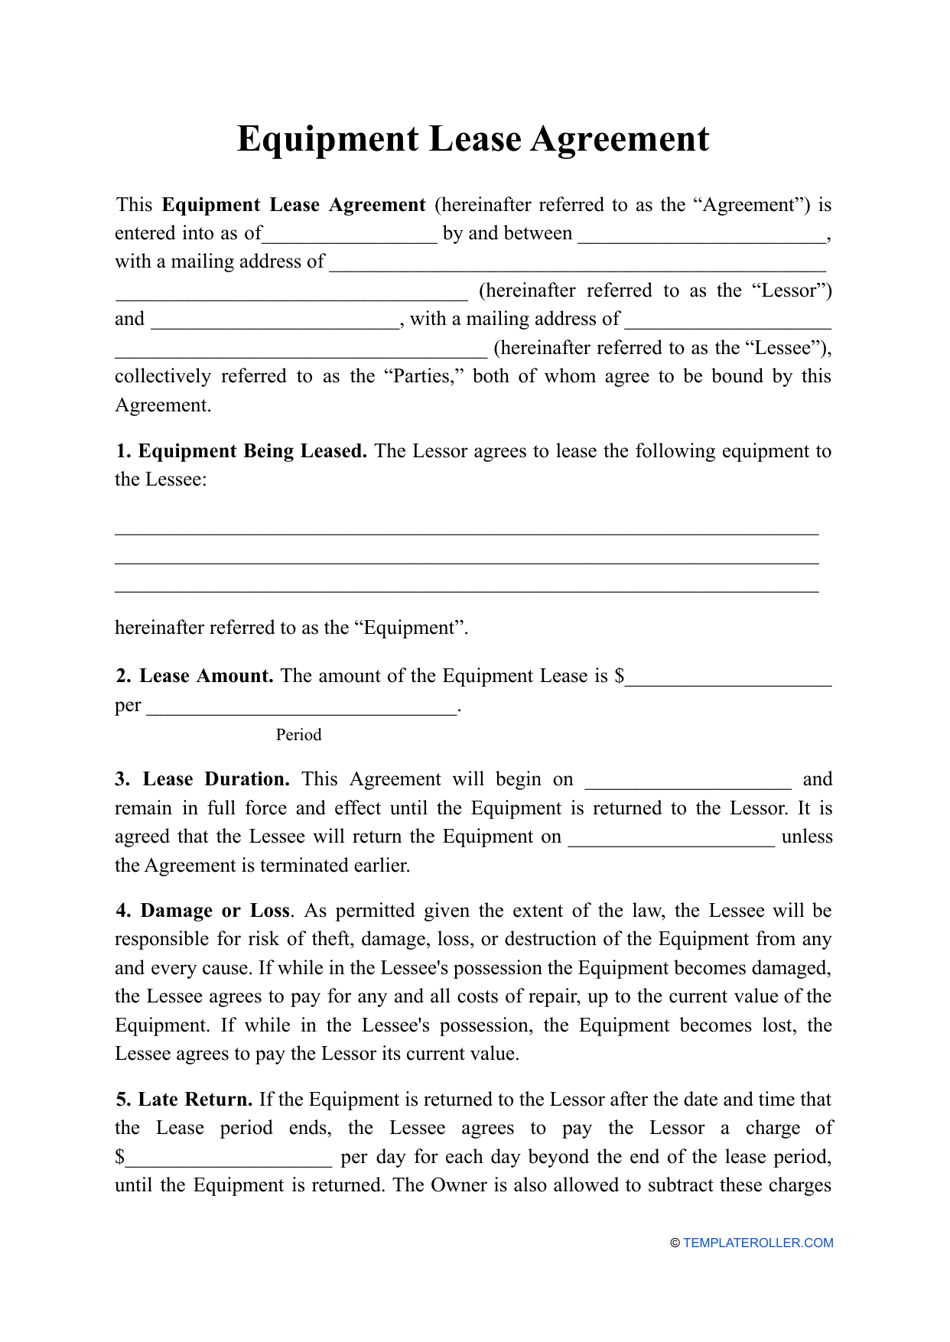 Equipment Lease Agreement Template Download Printable PDF Inside party equipment rental agreement template